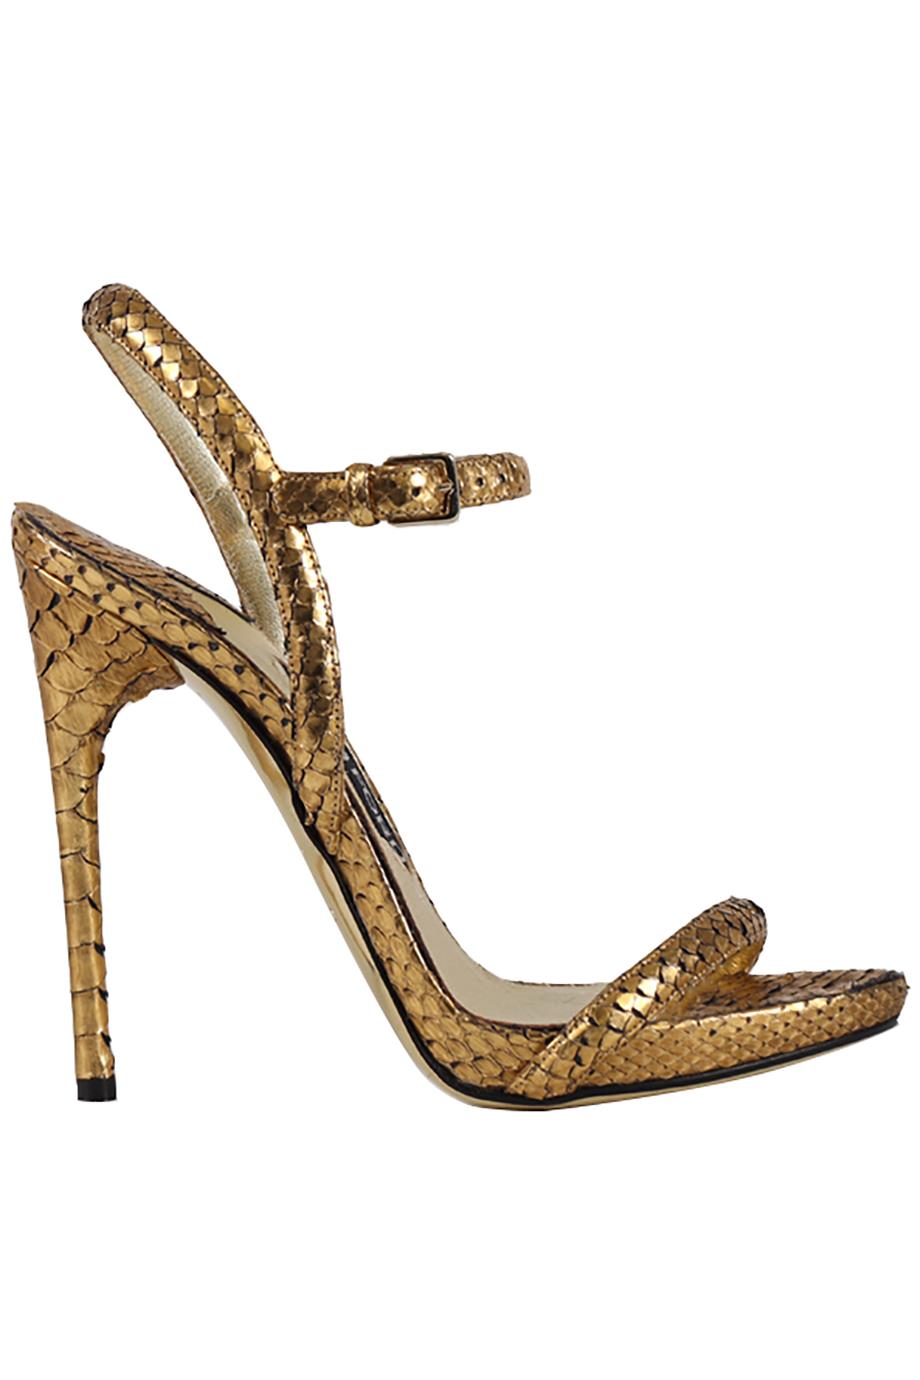 TOM FORD PYTHON AND LEATHER SANDALS EU 37.5 UK 4.5 US 7.5